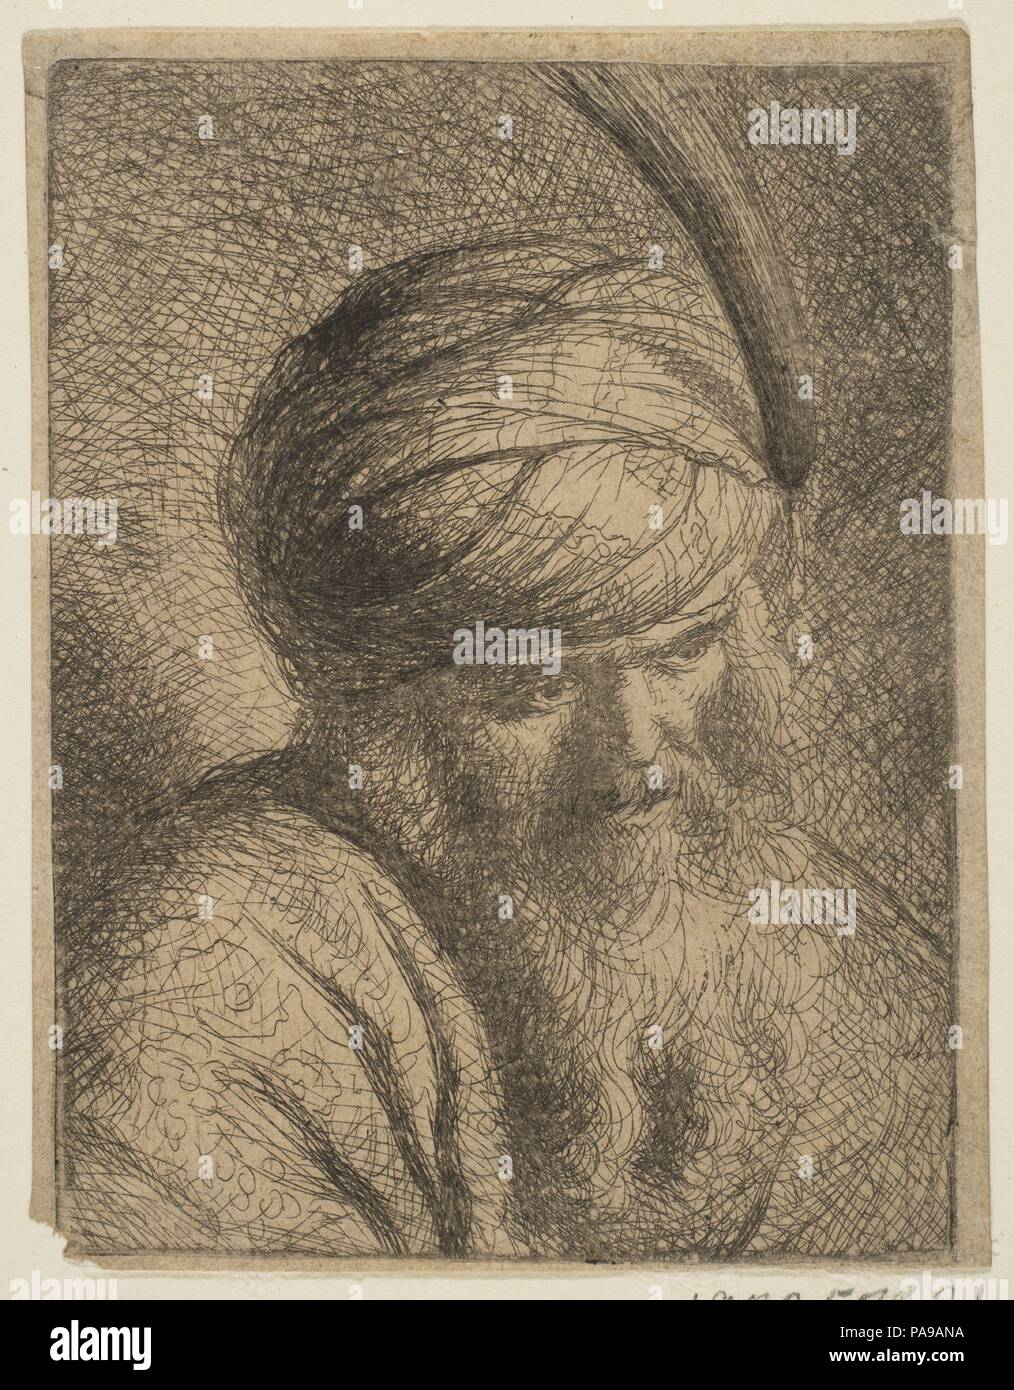 Bust of a Man in a Feathered Turban and Long Beard. Artist: Circle of Rembrandt (Rembrandt van Rijn) (Dutch, Leiden 1606-1669 Amsterdam). Dimensions: Sheet (Trimmed): 4 3/16 × 3 1/4 in. (10.6 × 8.3 cm). Date: n.d.. Museum: Metropolitan Museum of Art, New York, USA. Stock Photo